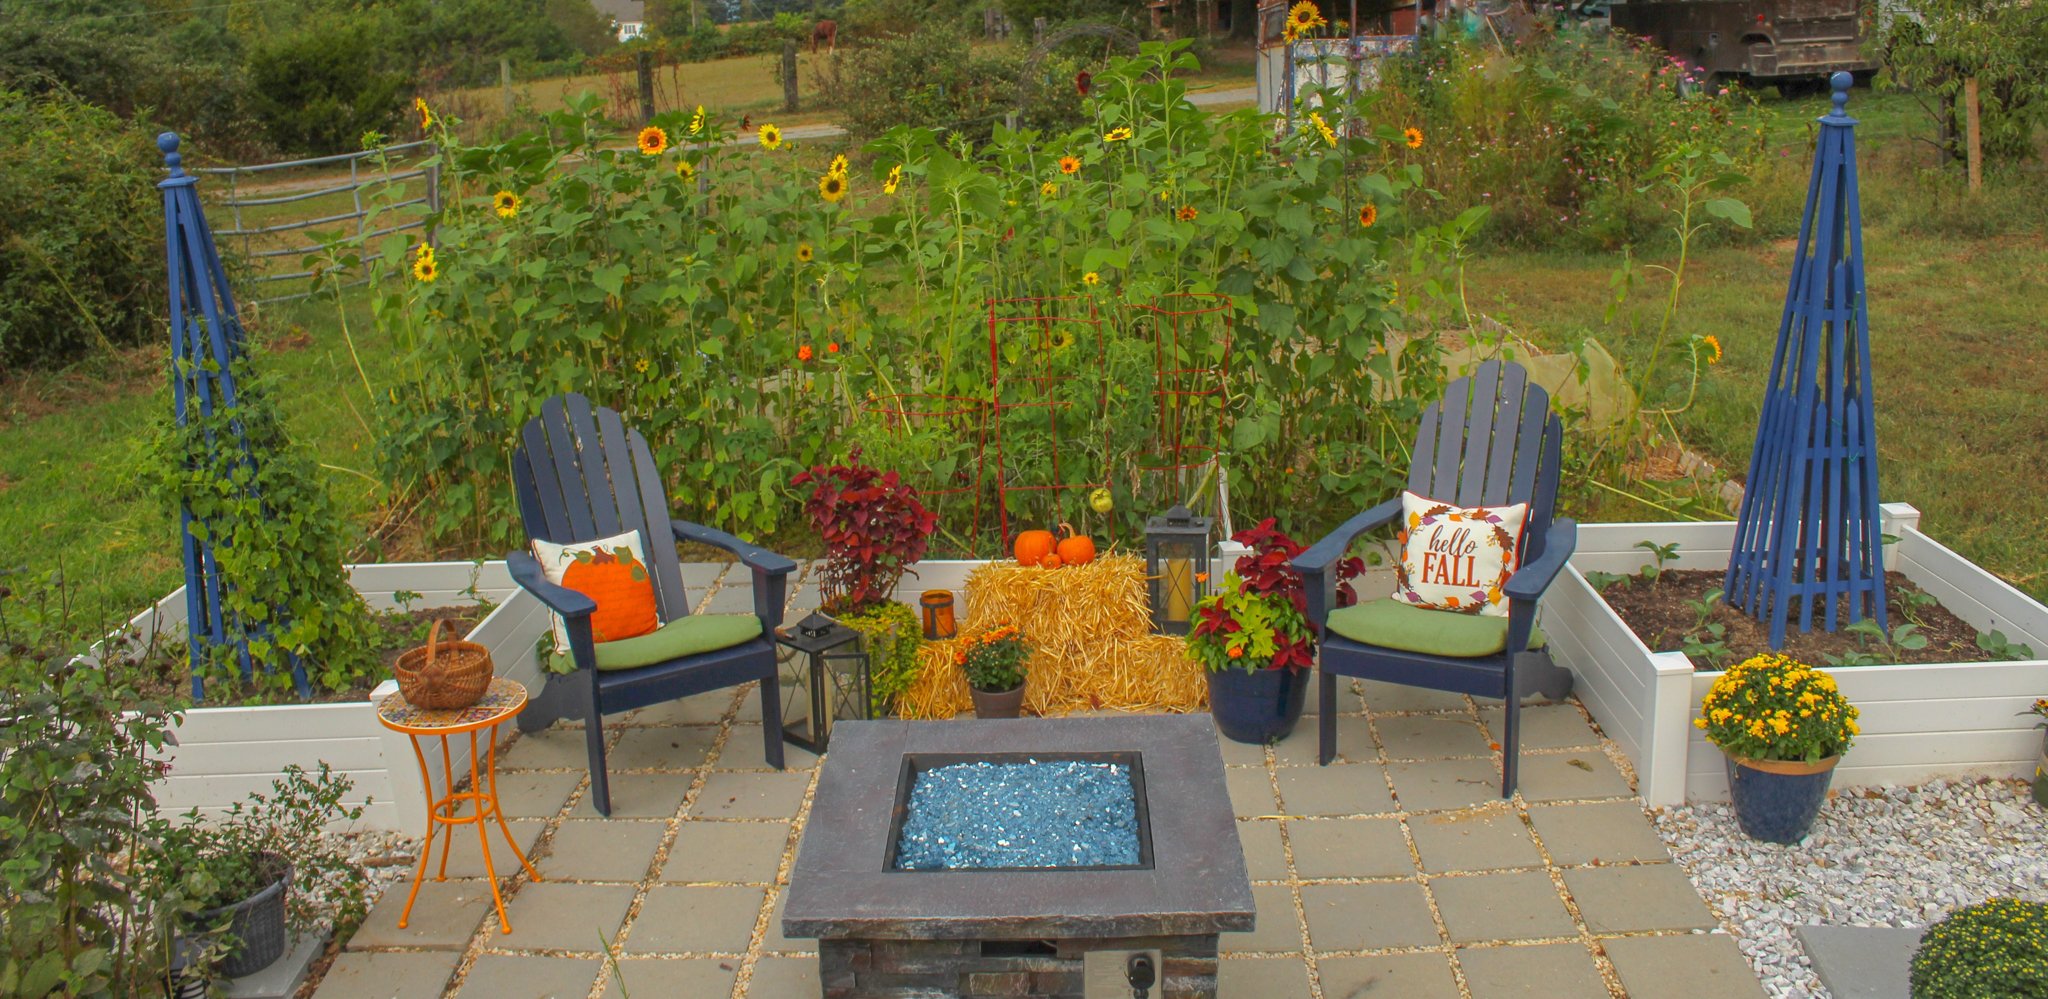 Fire pit in a backyard surrounded by chairs, sunflowers, pumpkins and bales of hay.